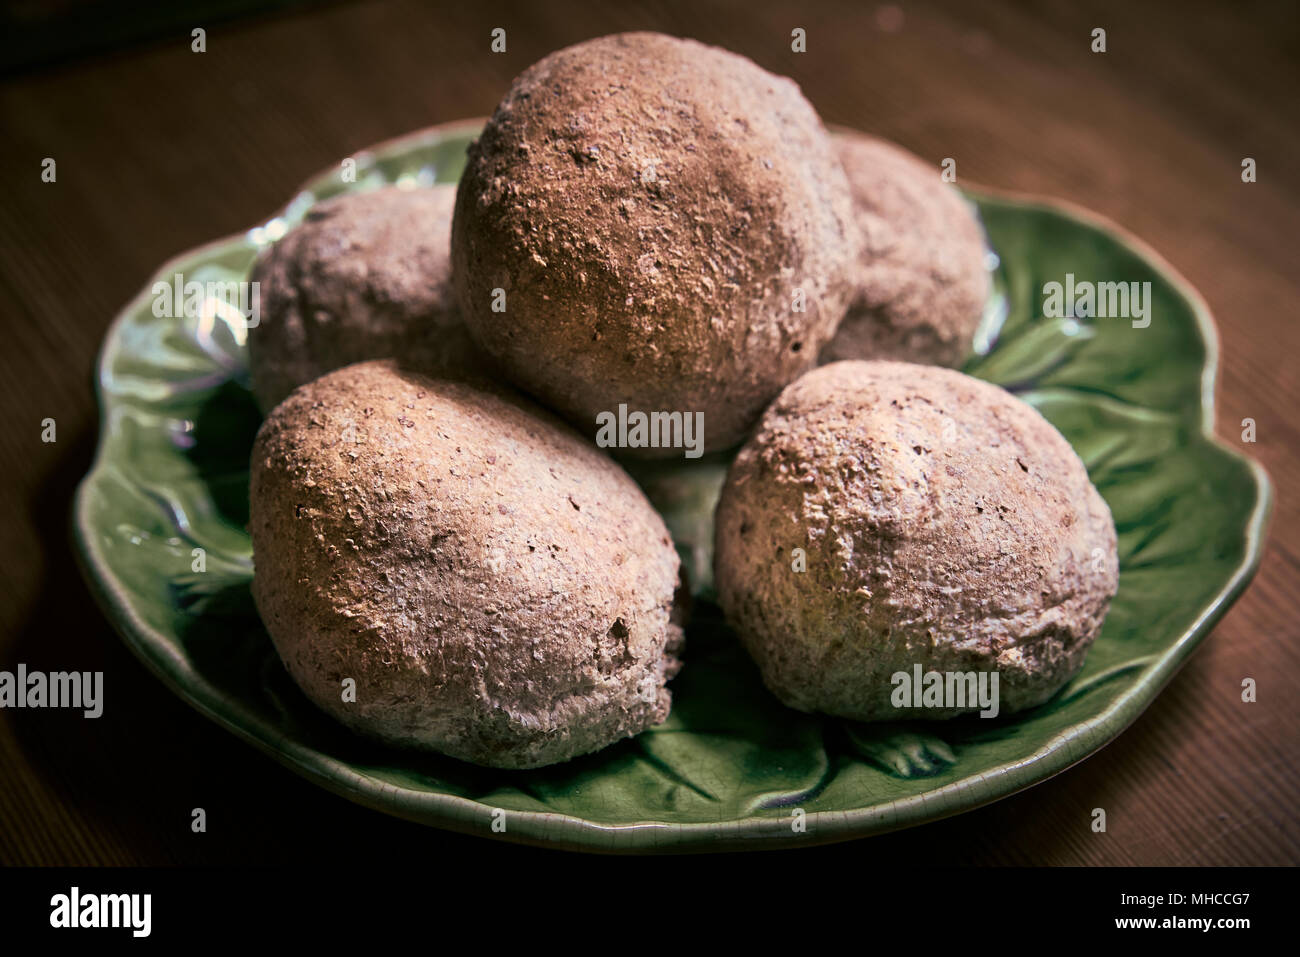 Rustic wholemeal rolls on a green serving plate Stock Photo